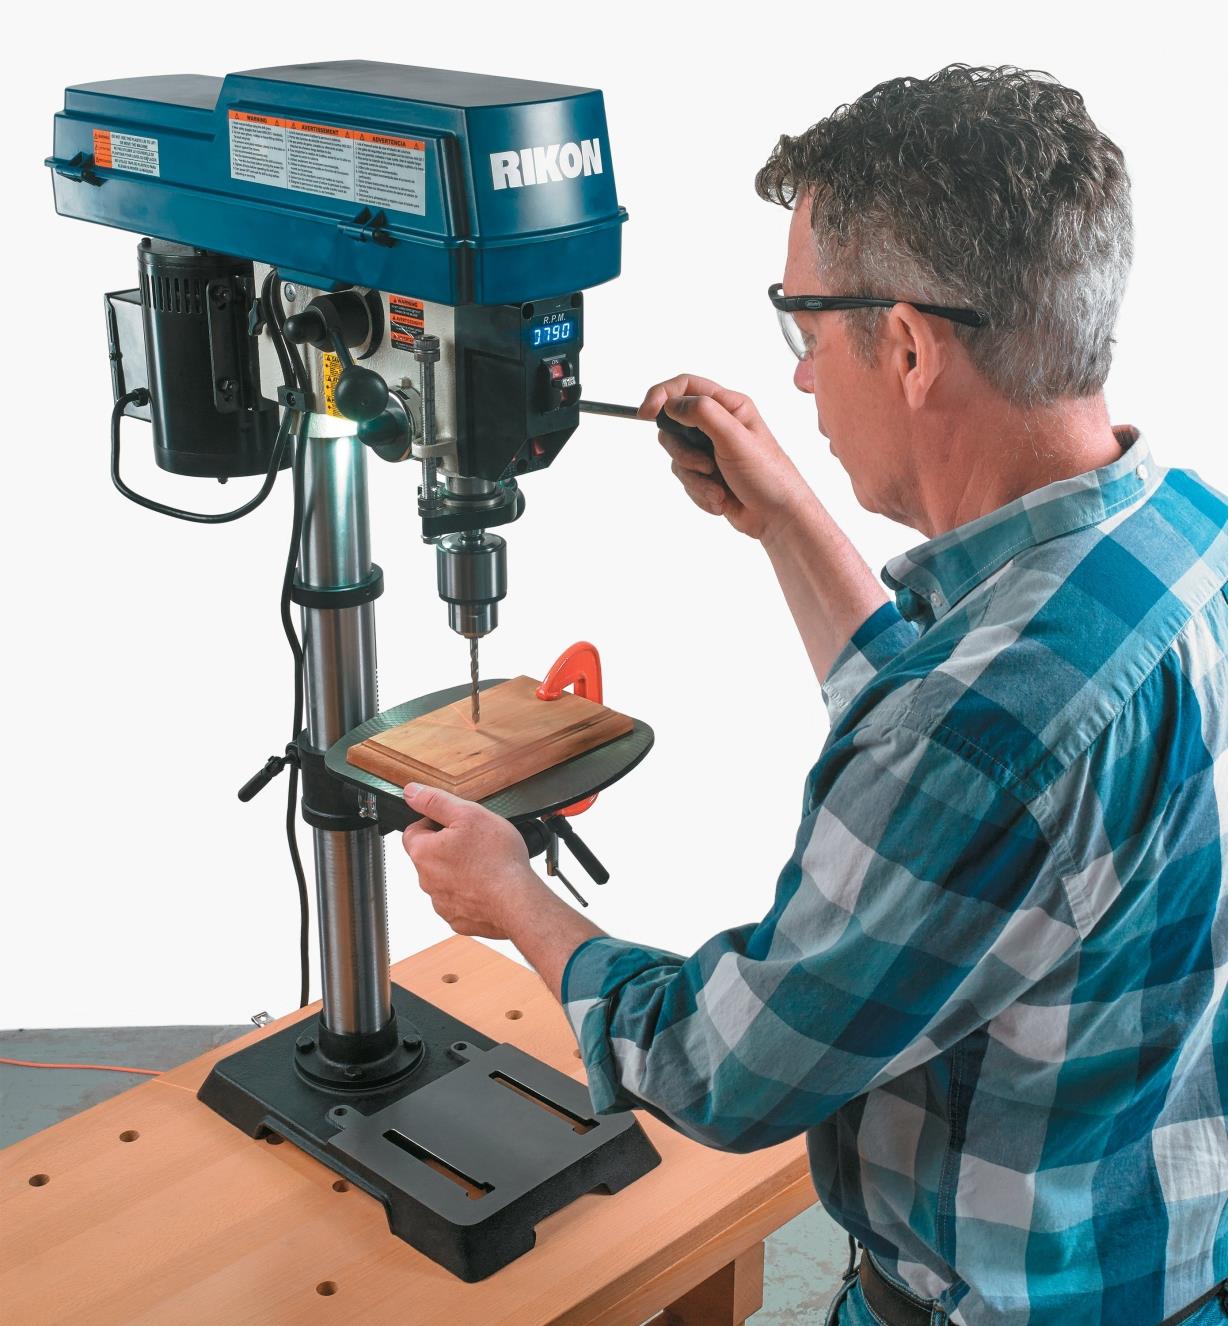 A man uses the drill press to drill a hole in a board